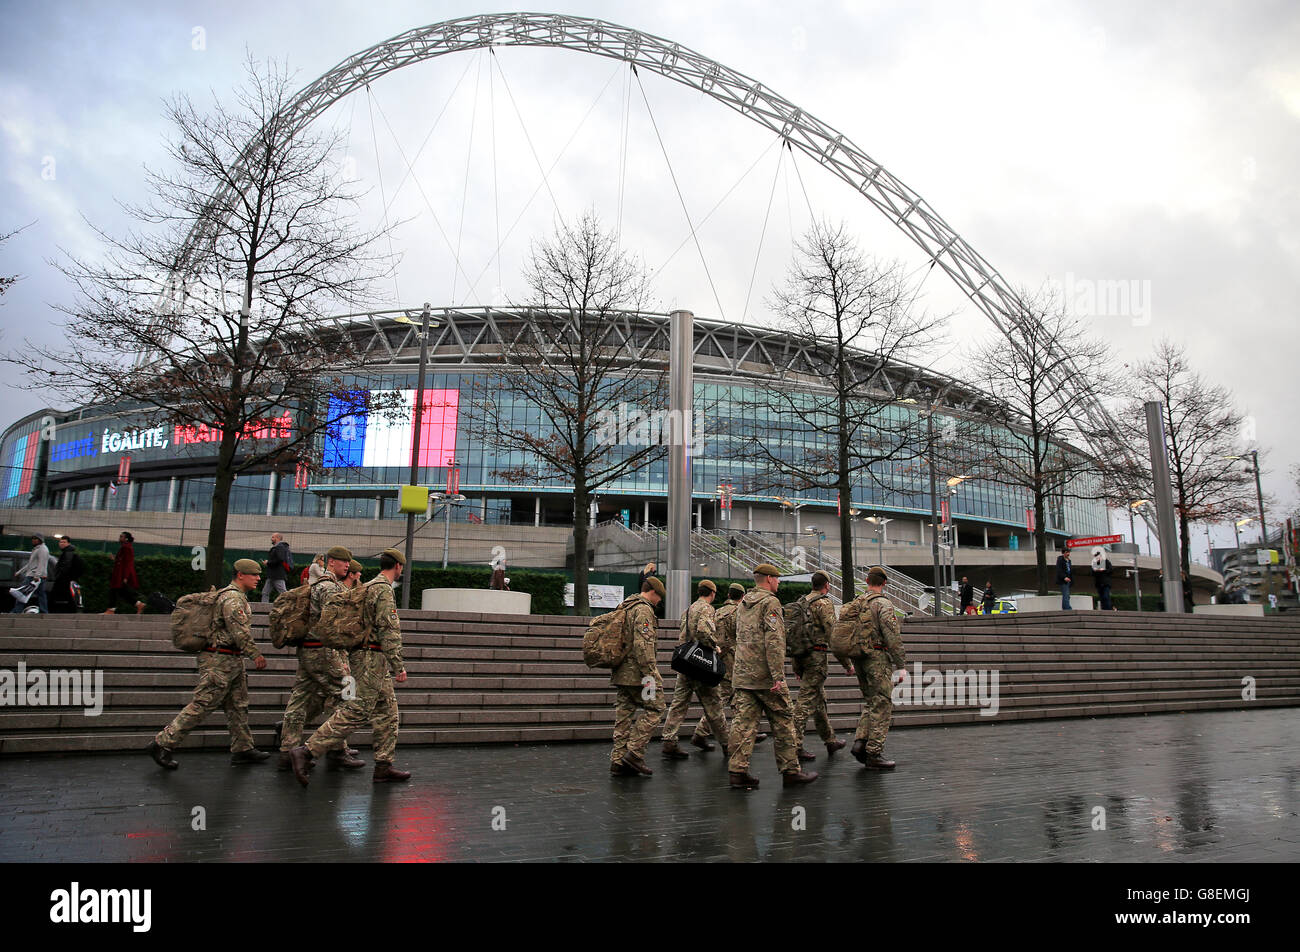 Members of the armed forces walking past the ground before the international friendly match at Wembley Stadium, London. Stock Photo